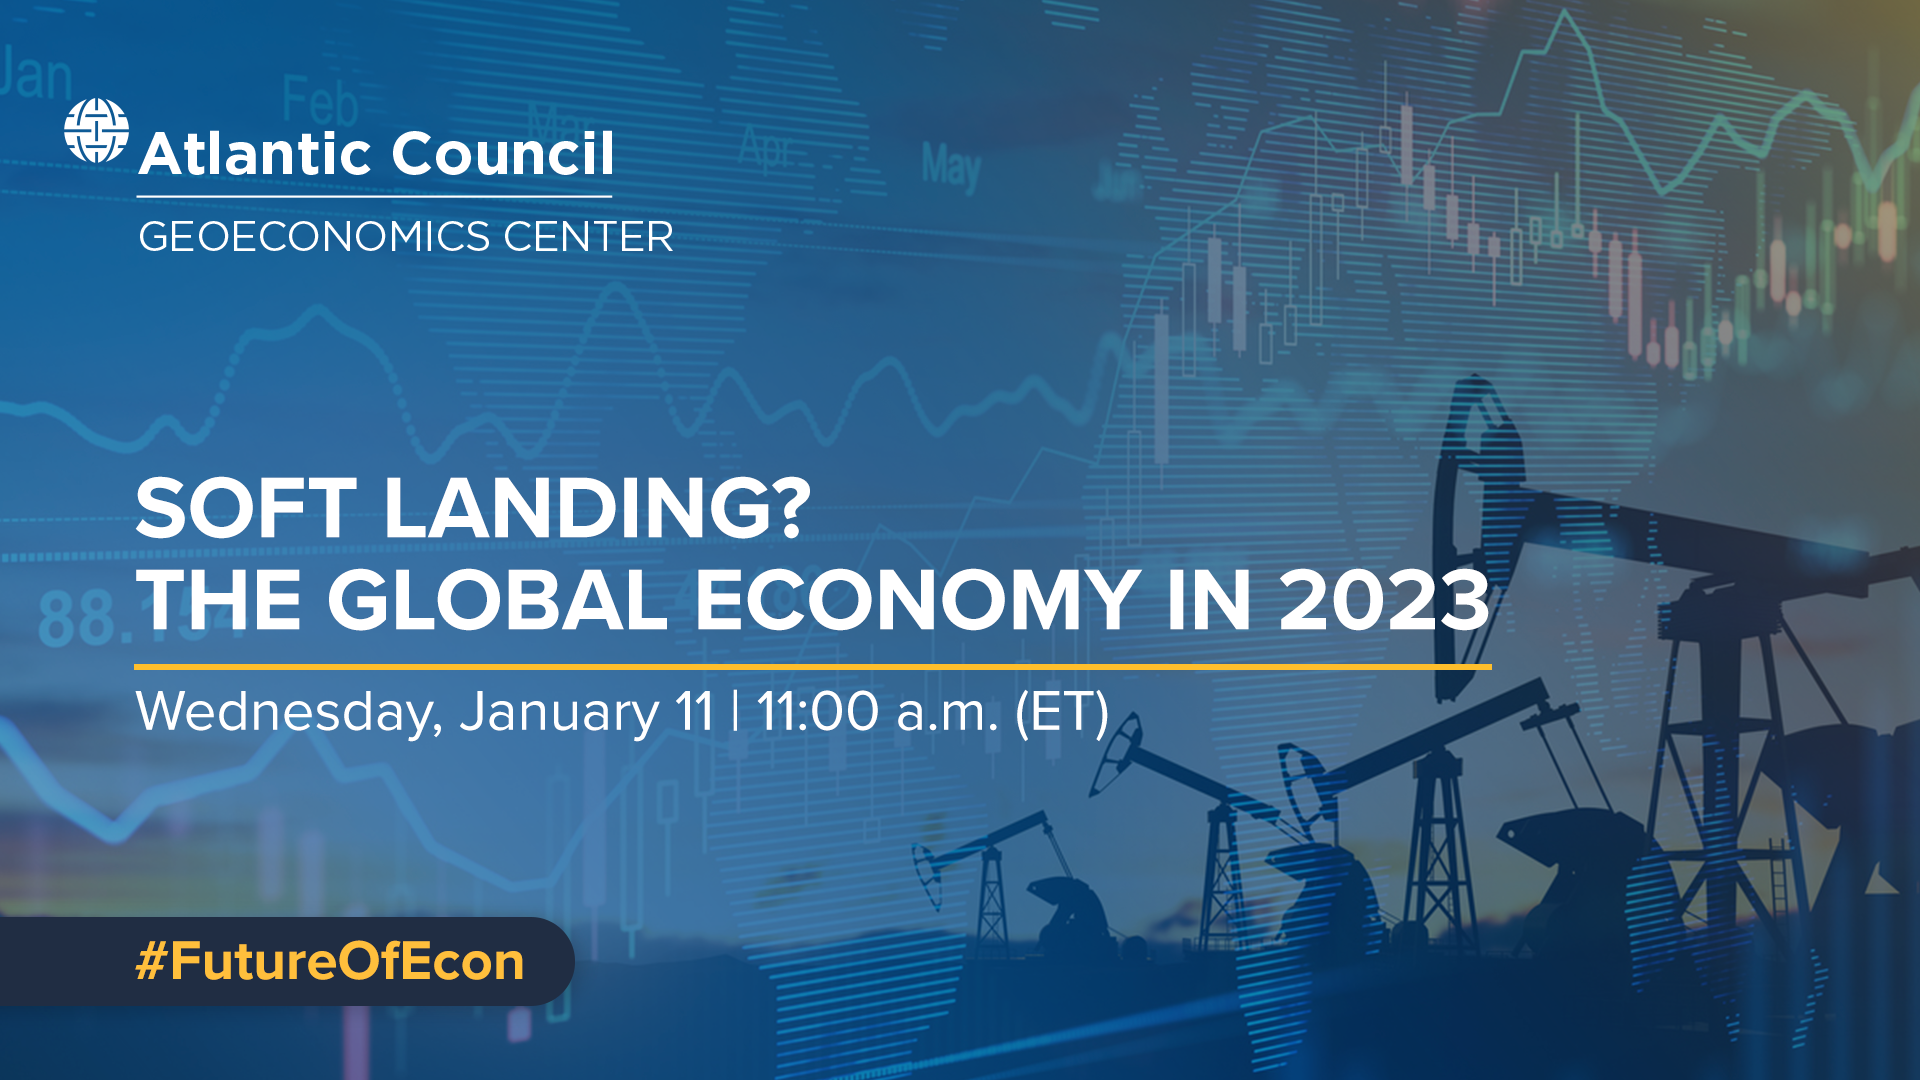 Soft landing? The global economy in 2023 - Atlantic Council